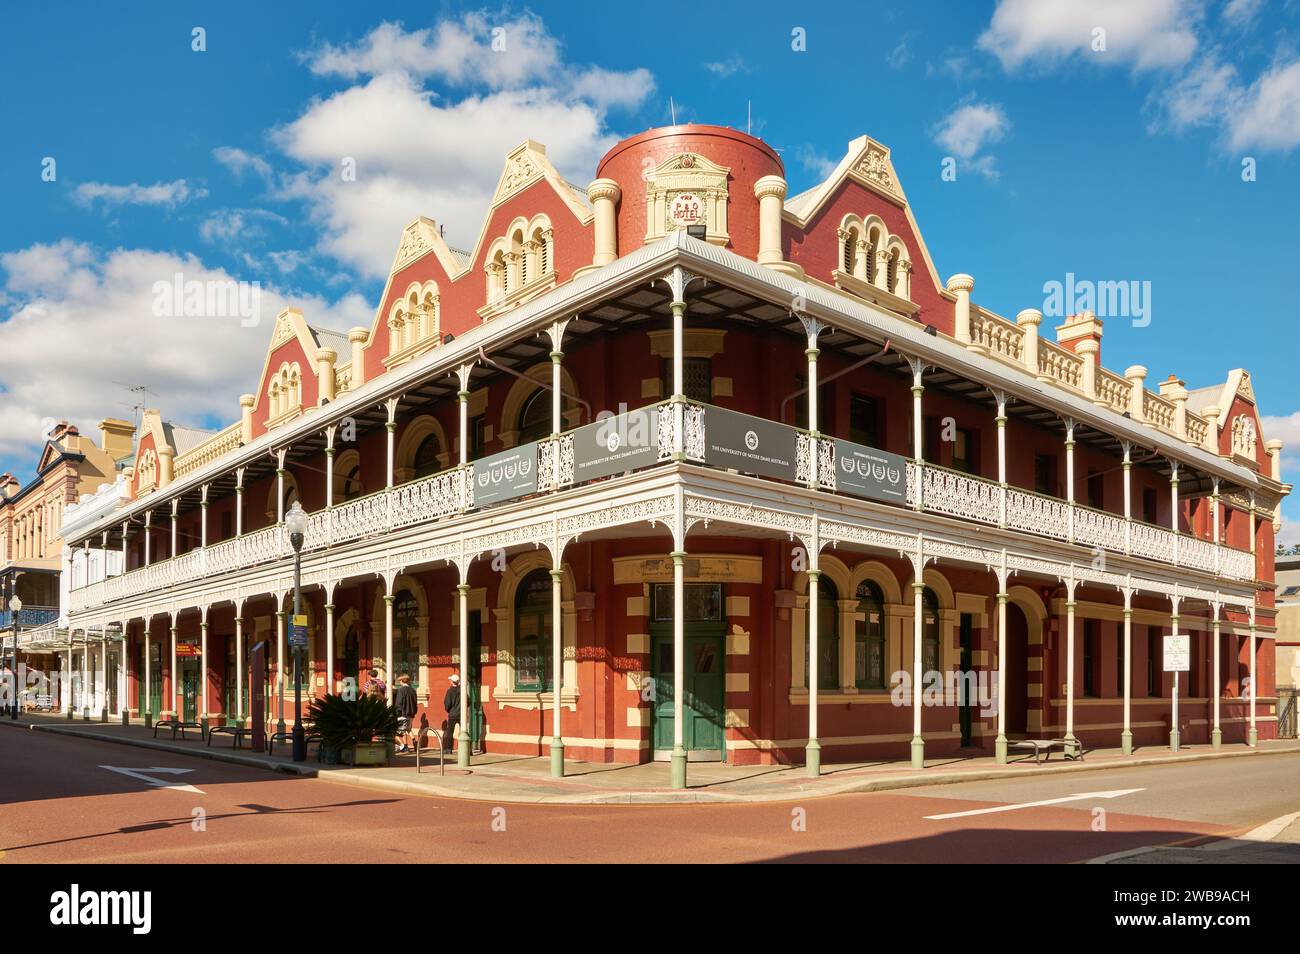 The historical P&O Hotel building now used by Notre Dame University in the West End of the port of Fremantle, Perth, Western Australia. Stock Photo